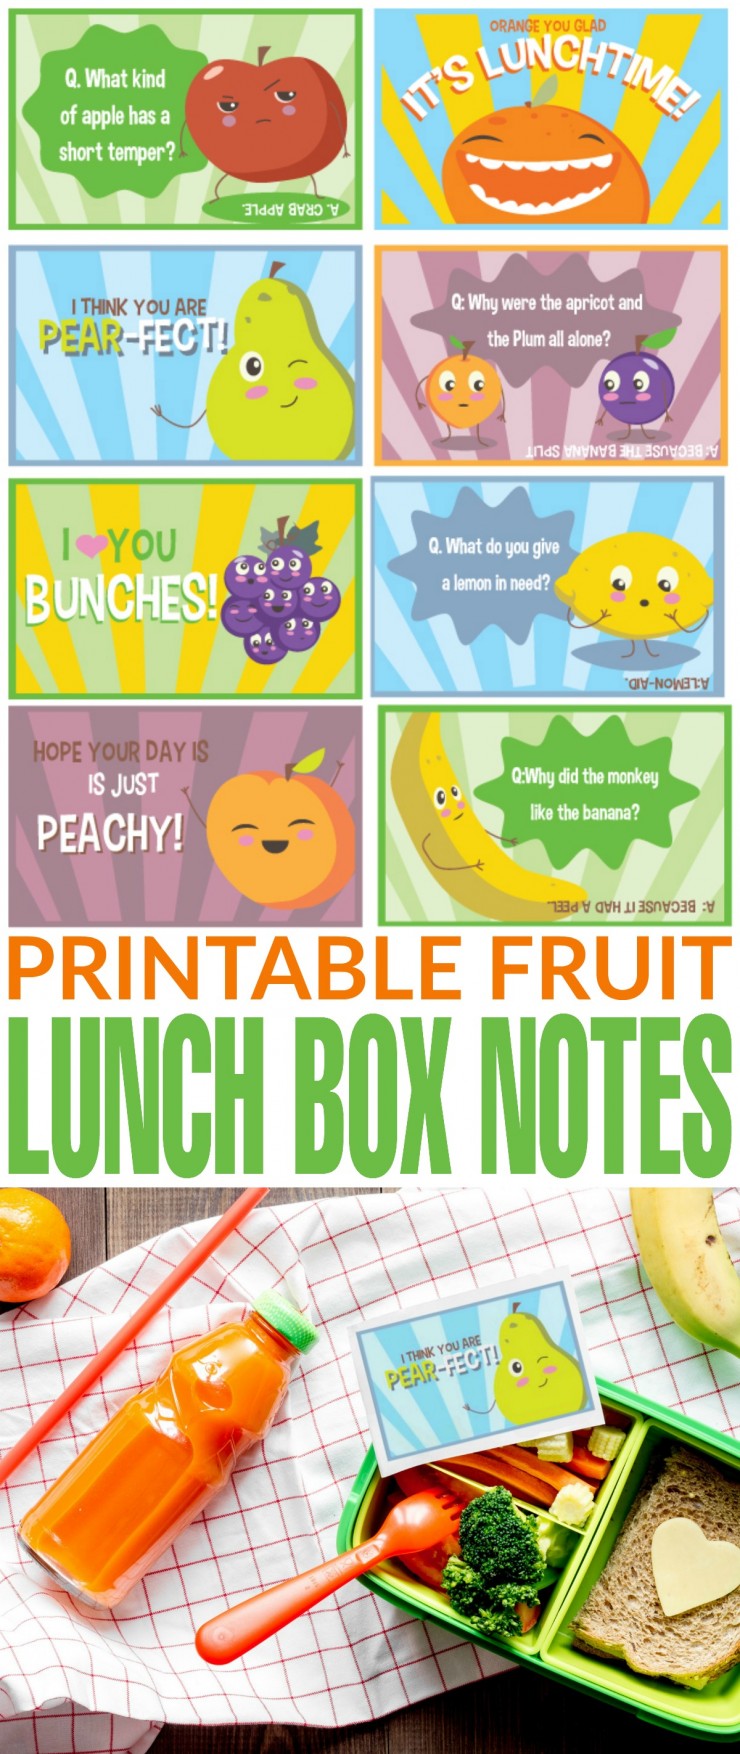 These Free Printable Fruit Lunch Box Notes are super fun and cute don’t you think? They bring me back to my childhood and the lunch notes my dad used to leave in my lunch from time to time.